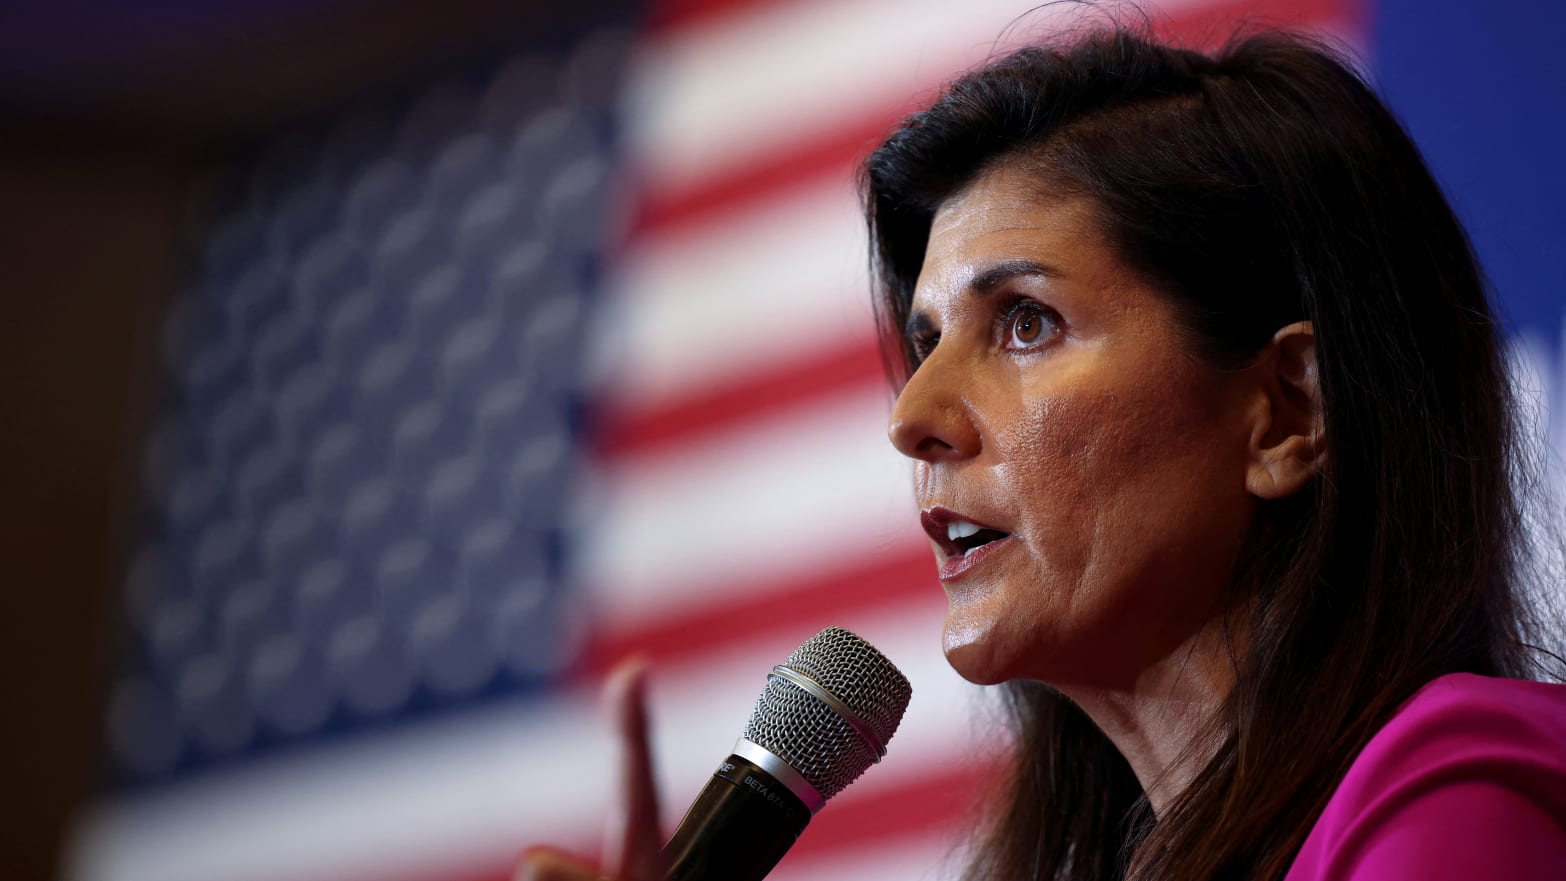 Nikki Haley, the former Governor of South Carolina and Ambassador to the UN, stumps for Virginia gubernatorial candidate Glenn Youngkin (R-VA), during a campaign event in McLean, Virginia, U.S., July 14, 2021. 